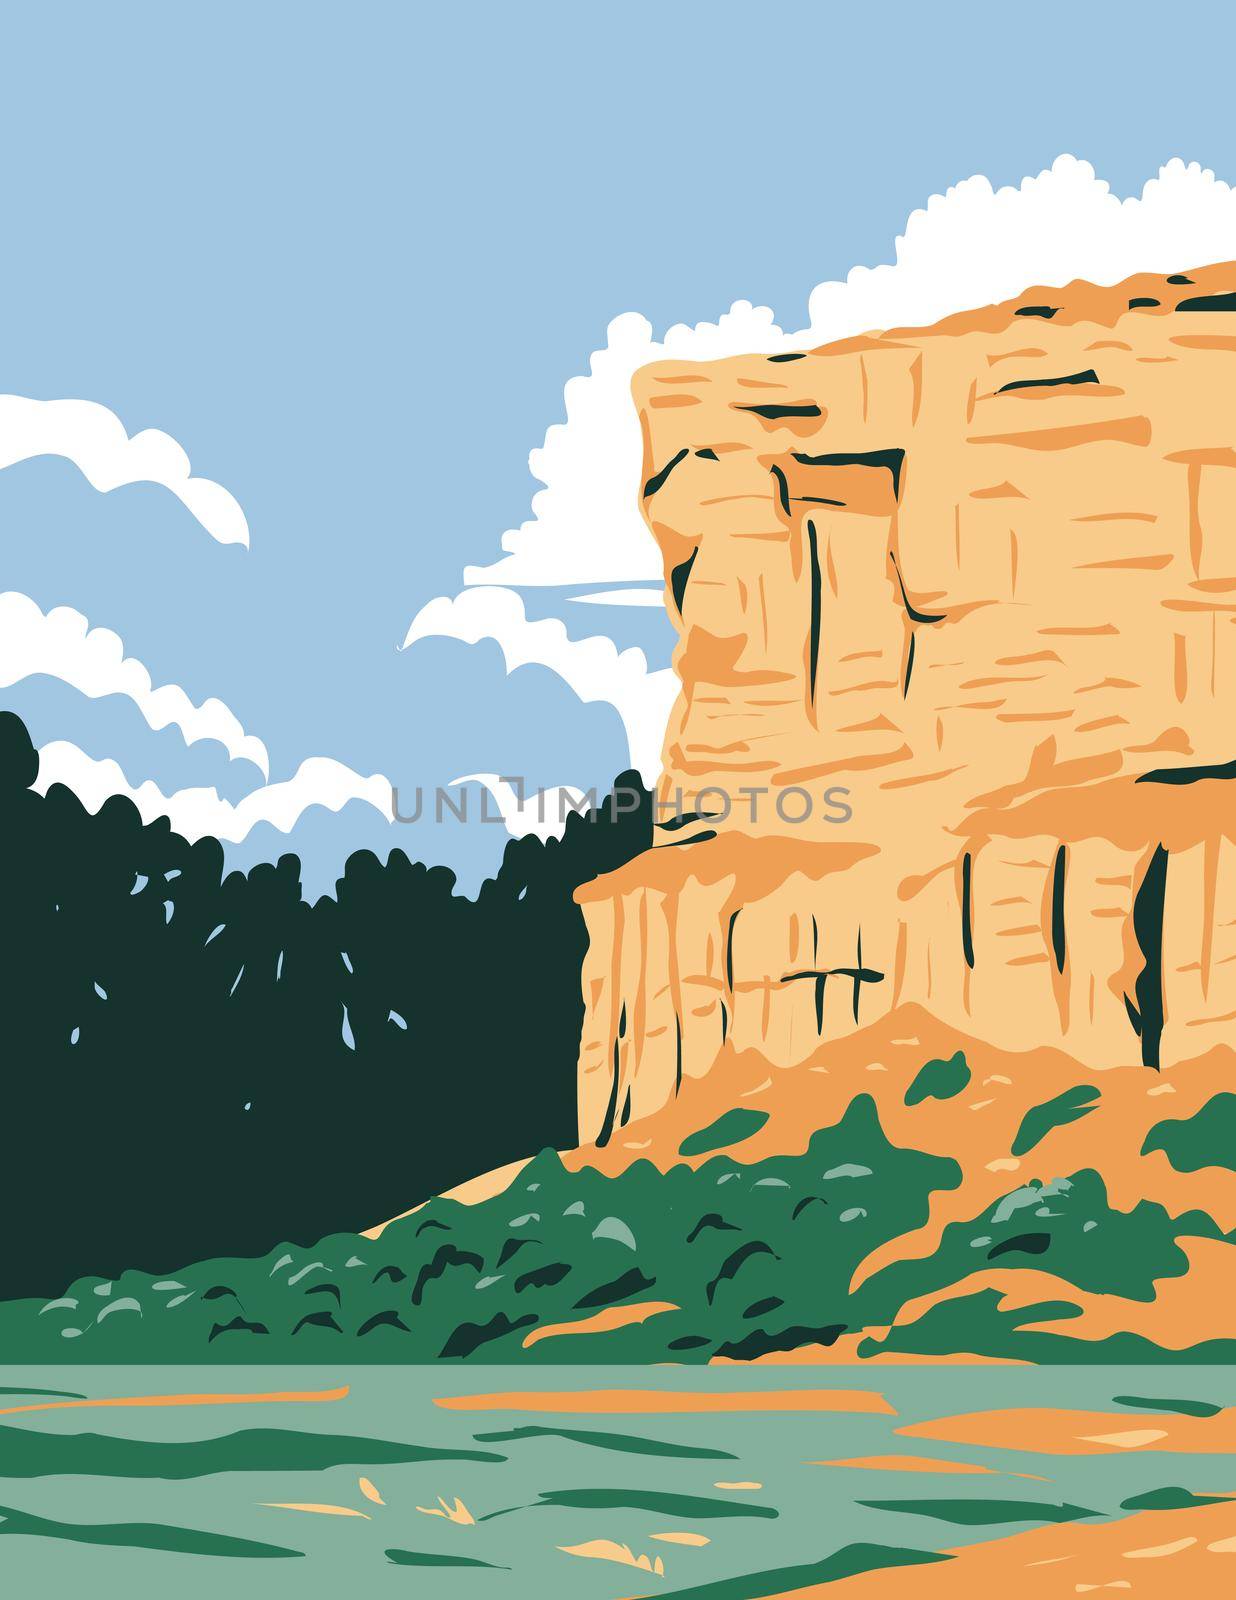 WPA Poster Art of Pompeys Pillar National Monument a sandstone pillar and rock formation located in south central Montana, United States done in works project administration style. by patrimonio